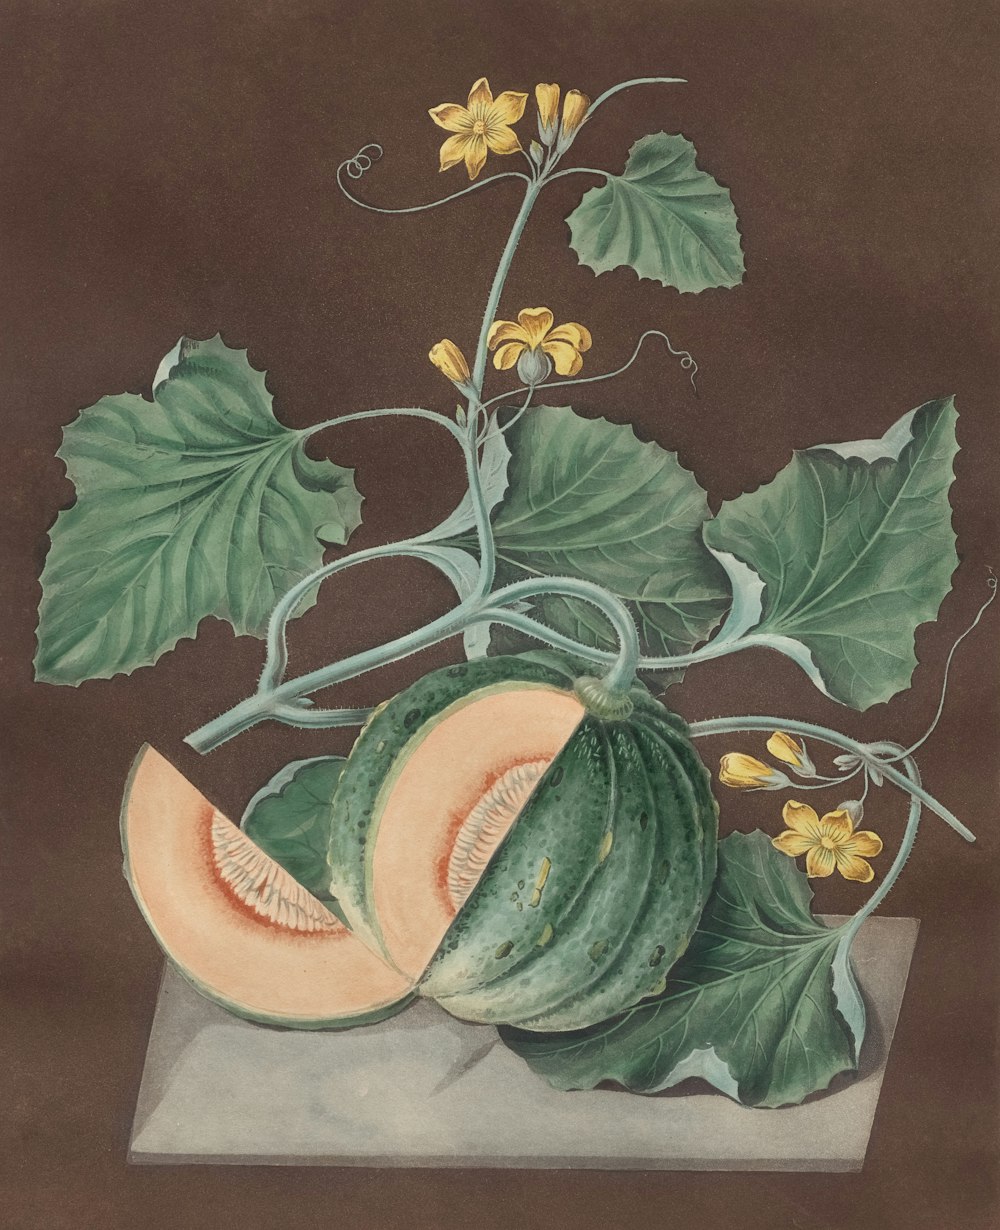 a painting of a melon with leaves and flowers